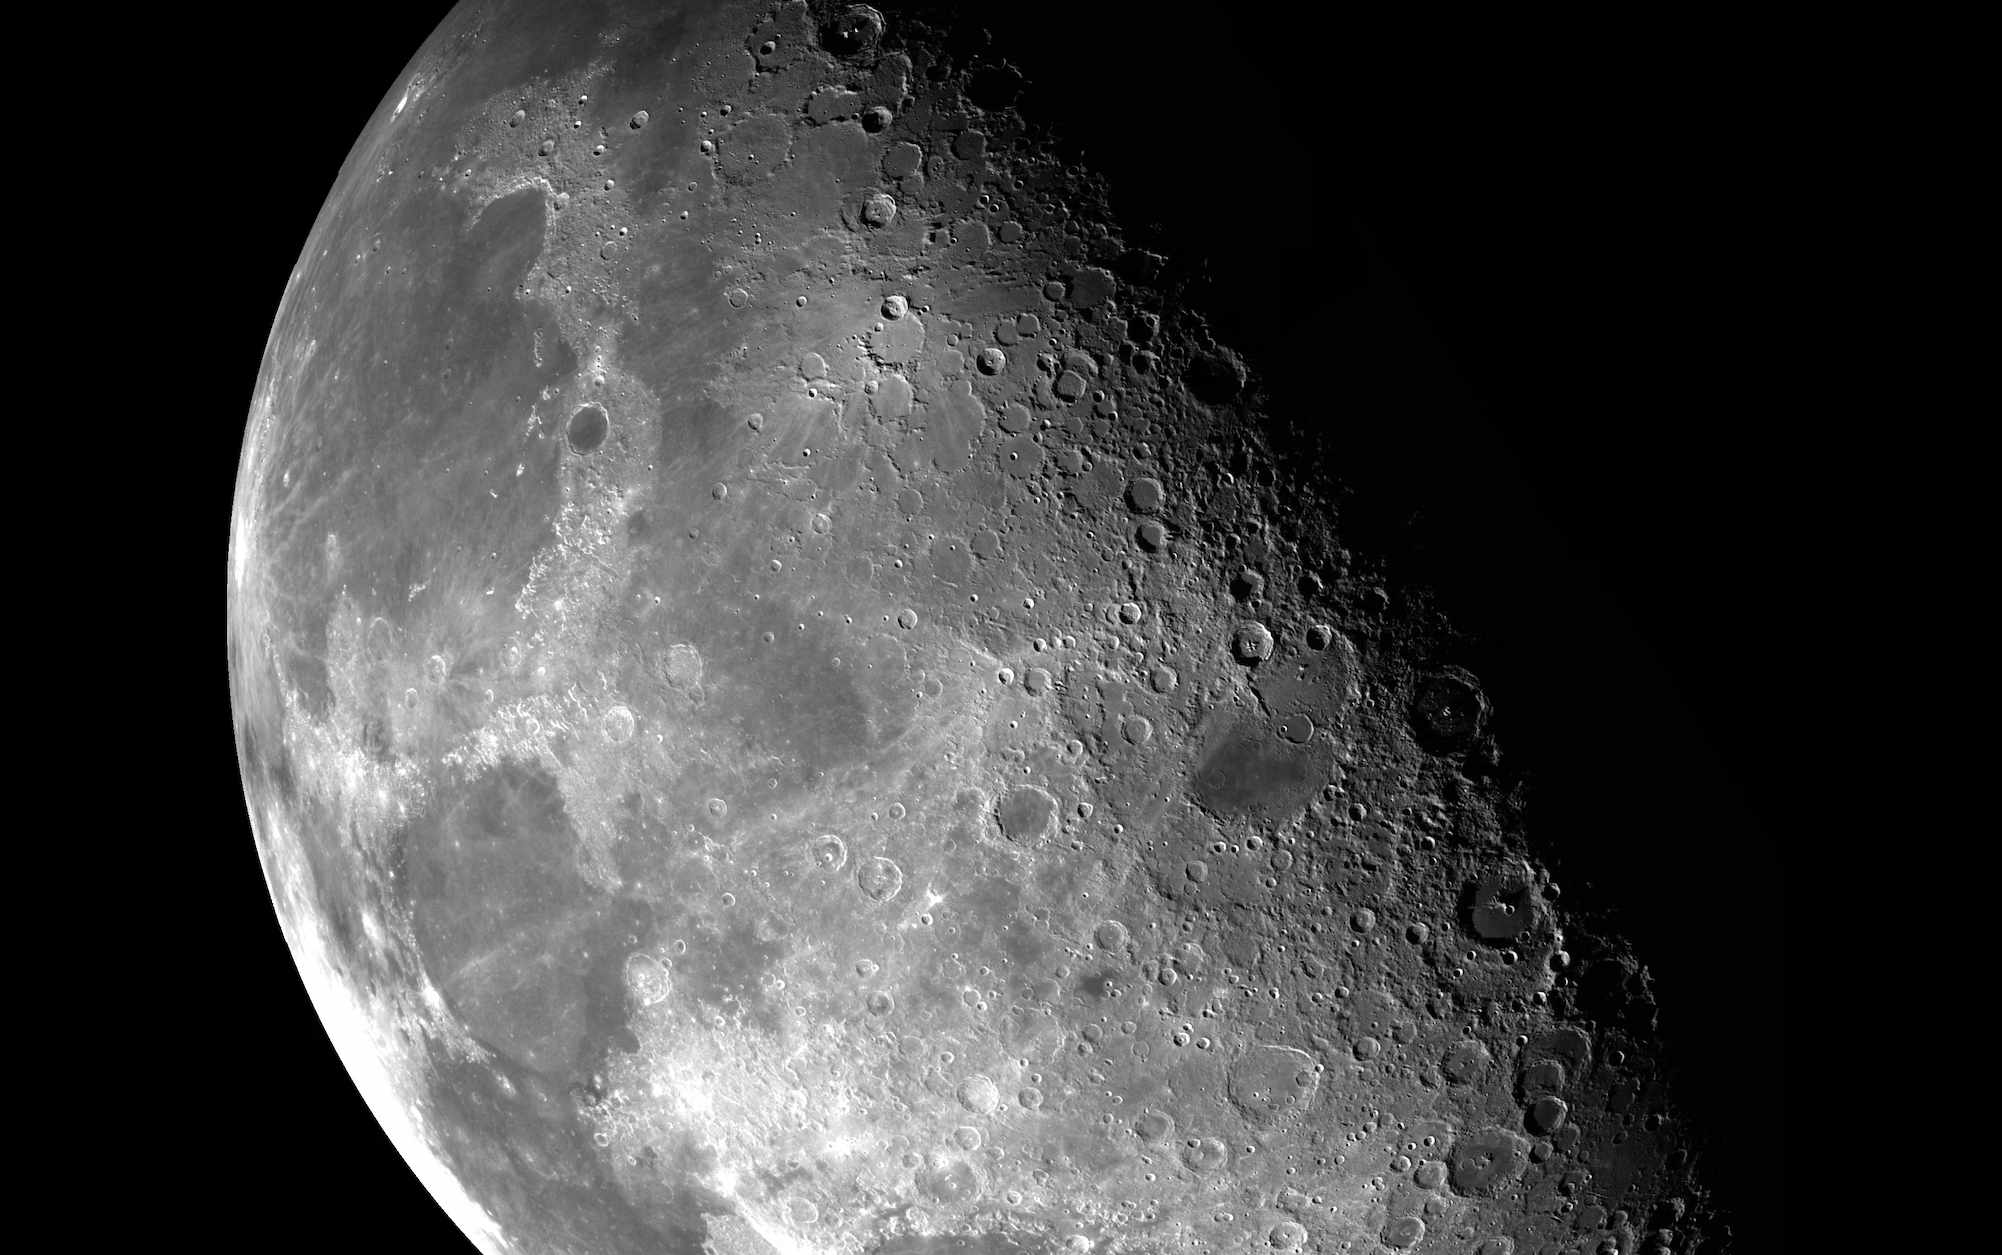 Excitement about Samsung'amp;s image optimization for moon shots